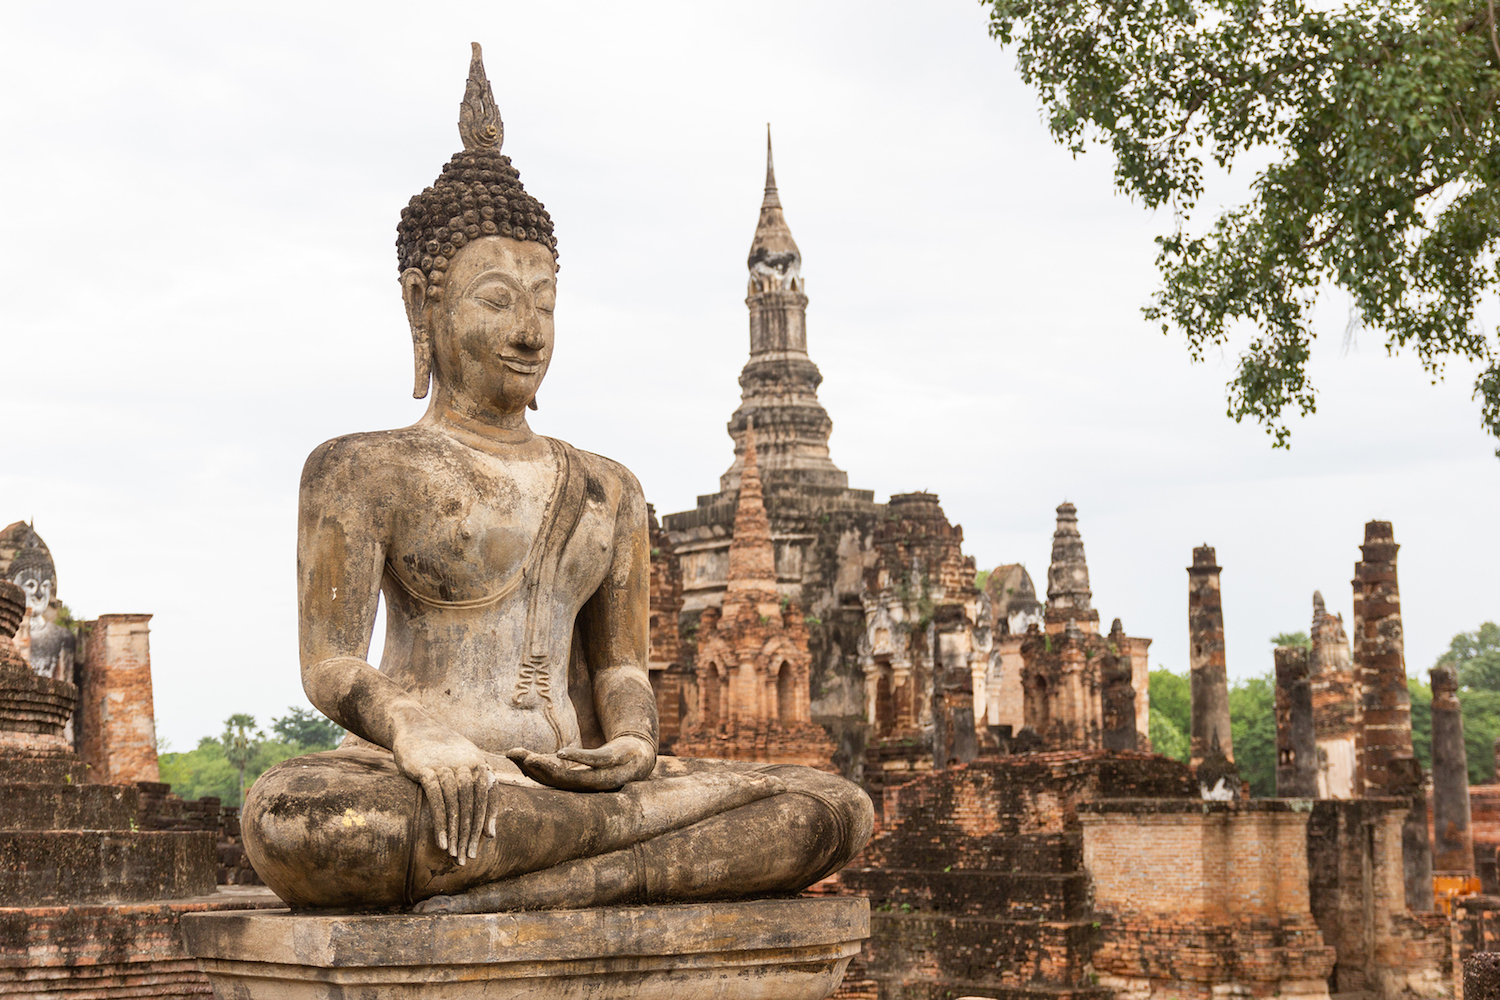 UNESCO World Heritage Site in Thailand. Buddha Statues At Wat Mahathat Ancient Capital Of Sukhothai, Thailand.